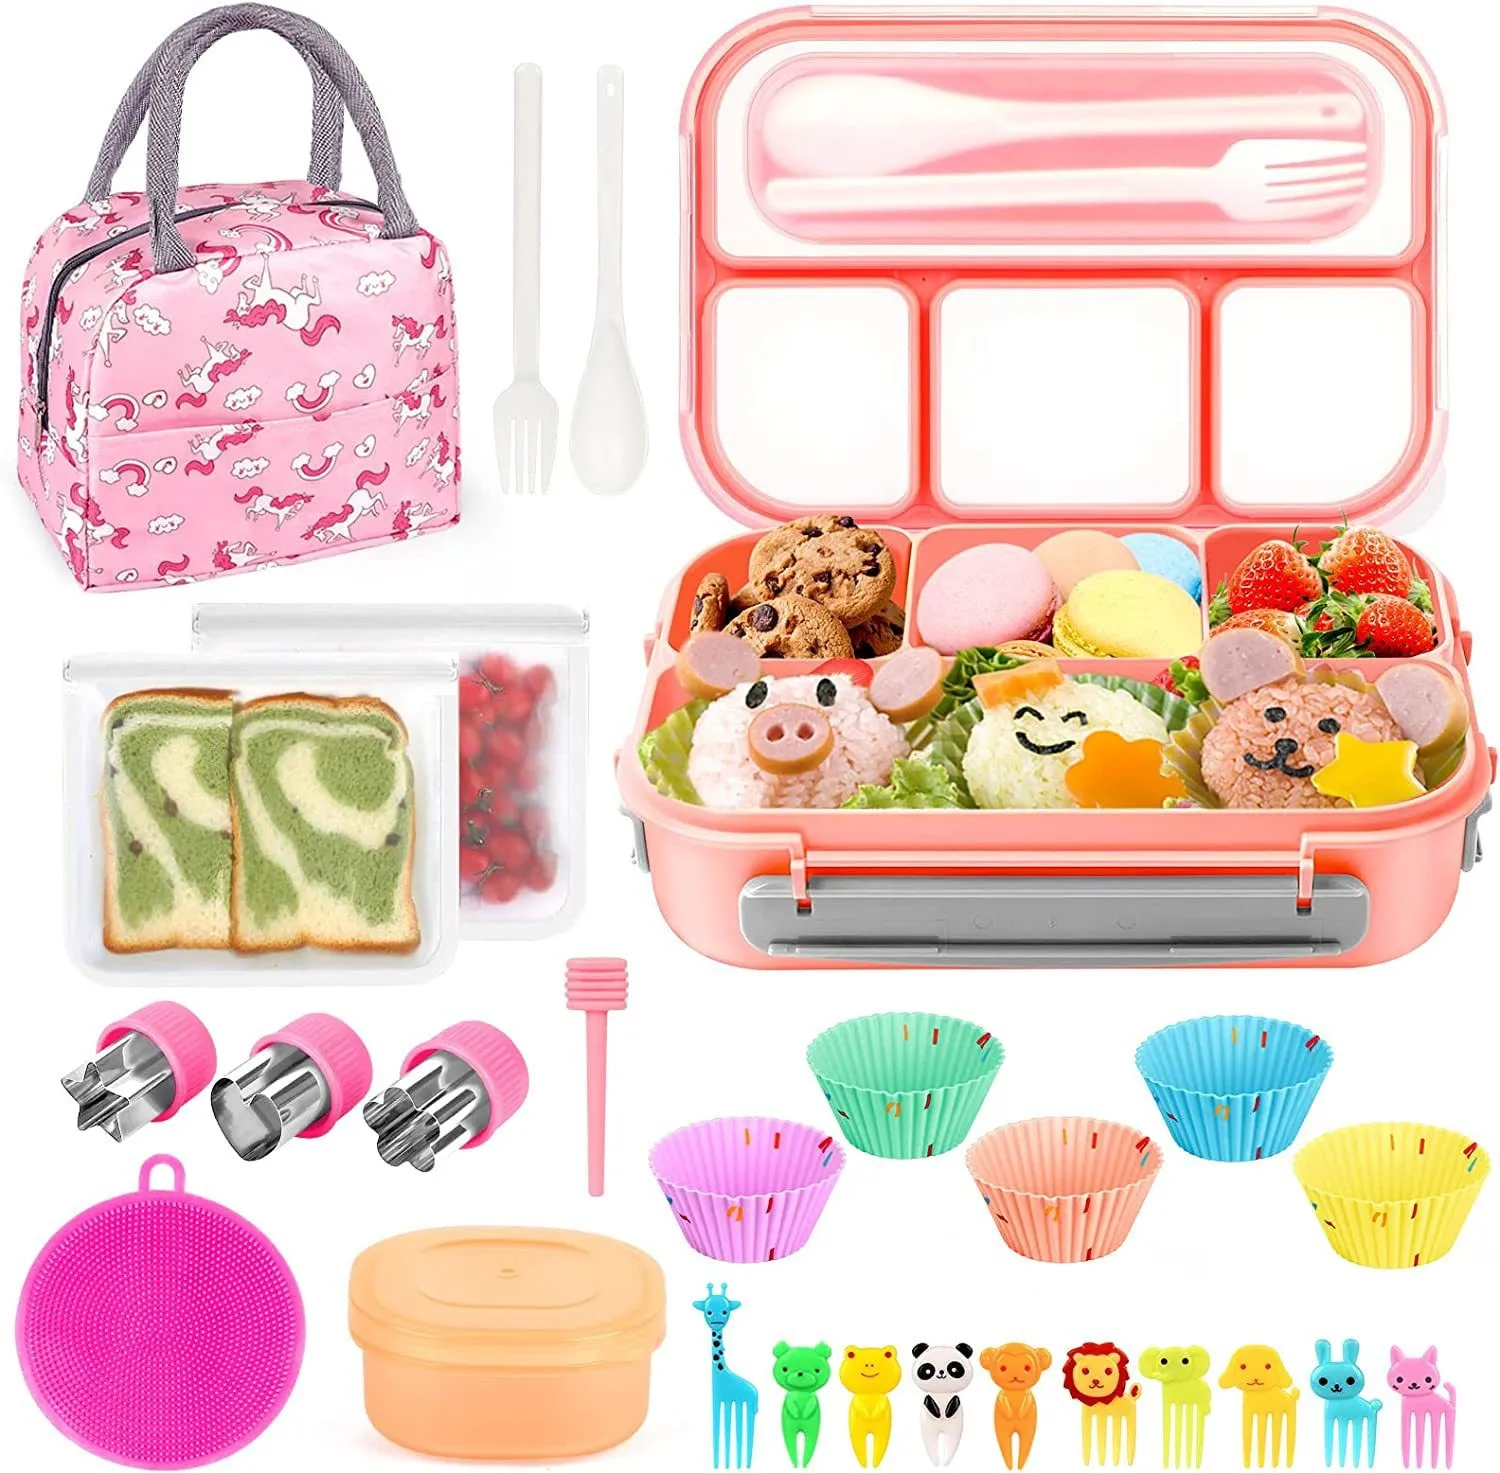 Portable Lunch Box Lunch Bags for Children School Office Bento Box